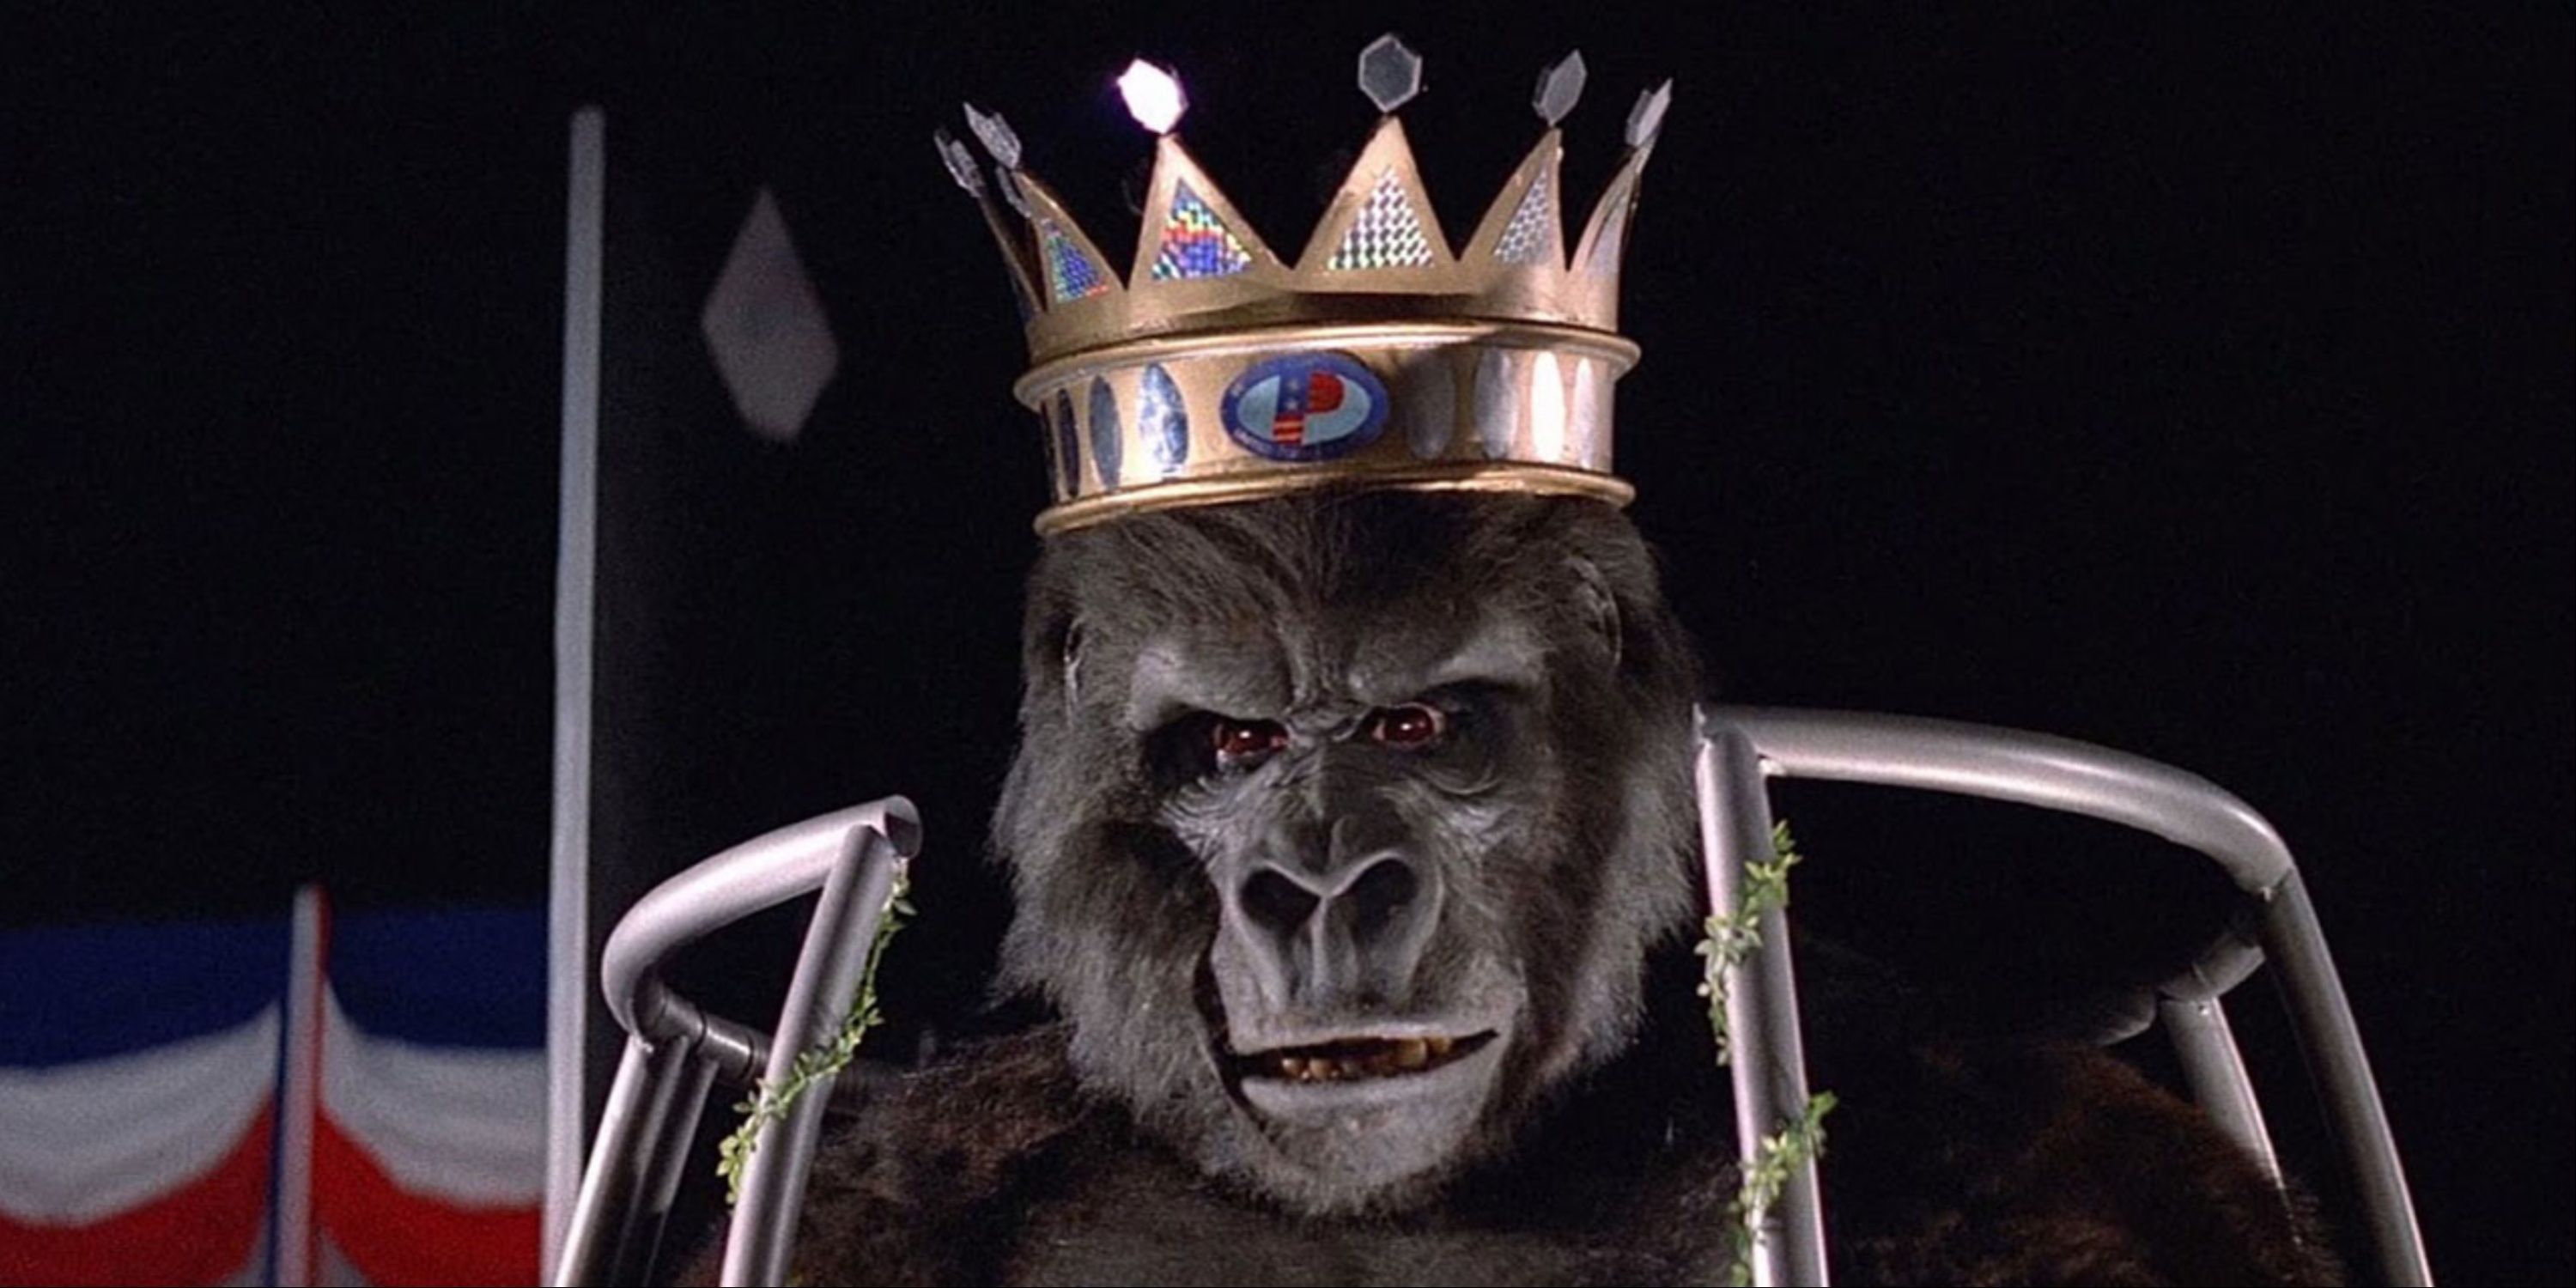 Putting the "King" in King Kong